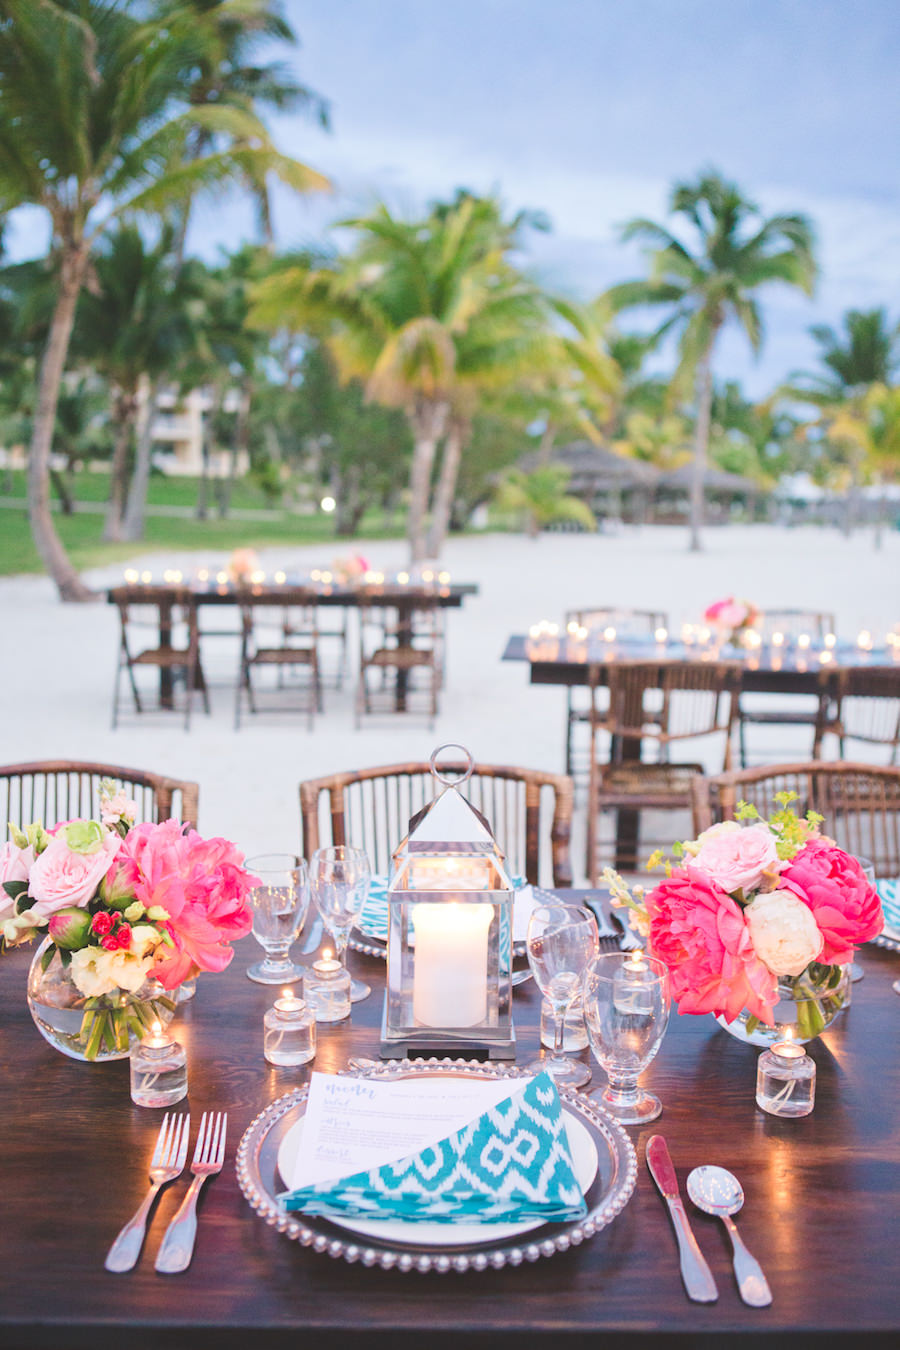 Bahamas Destination Beach Caribbean Reception Venue with Farm Tables, Bamboo Seating, Turquoise Green Napkins, Bright Pink Centerpieces and Candlelight | Aisle Society Weddings Abaco Beach Resort